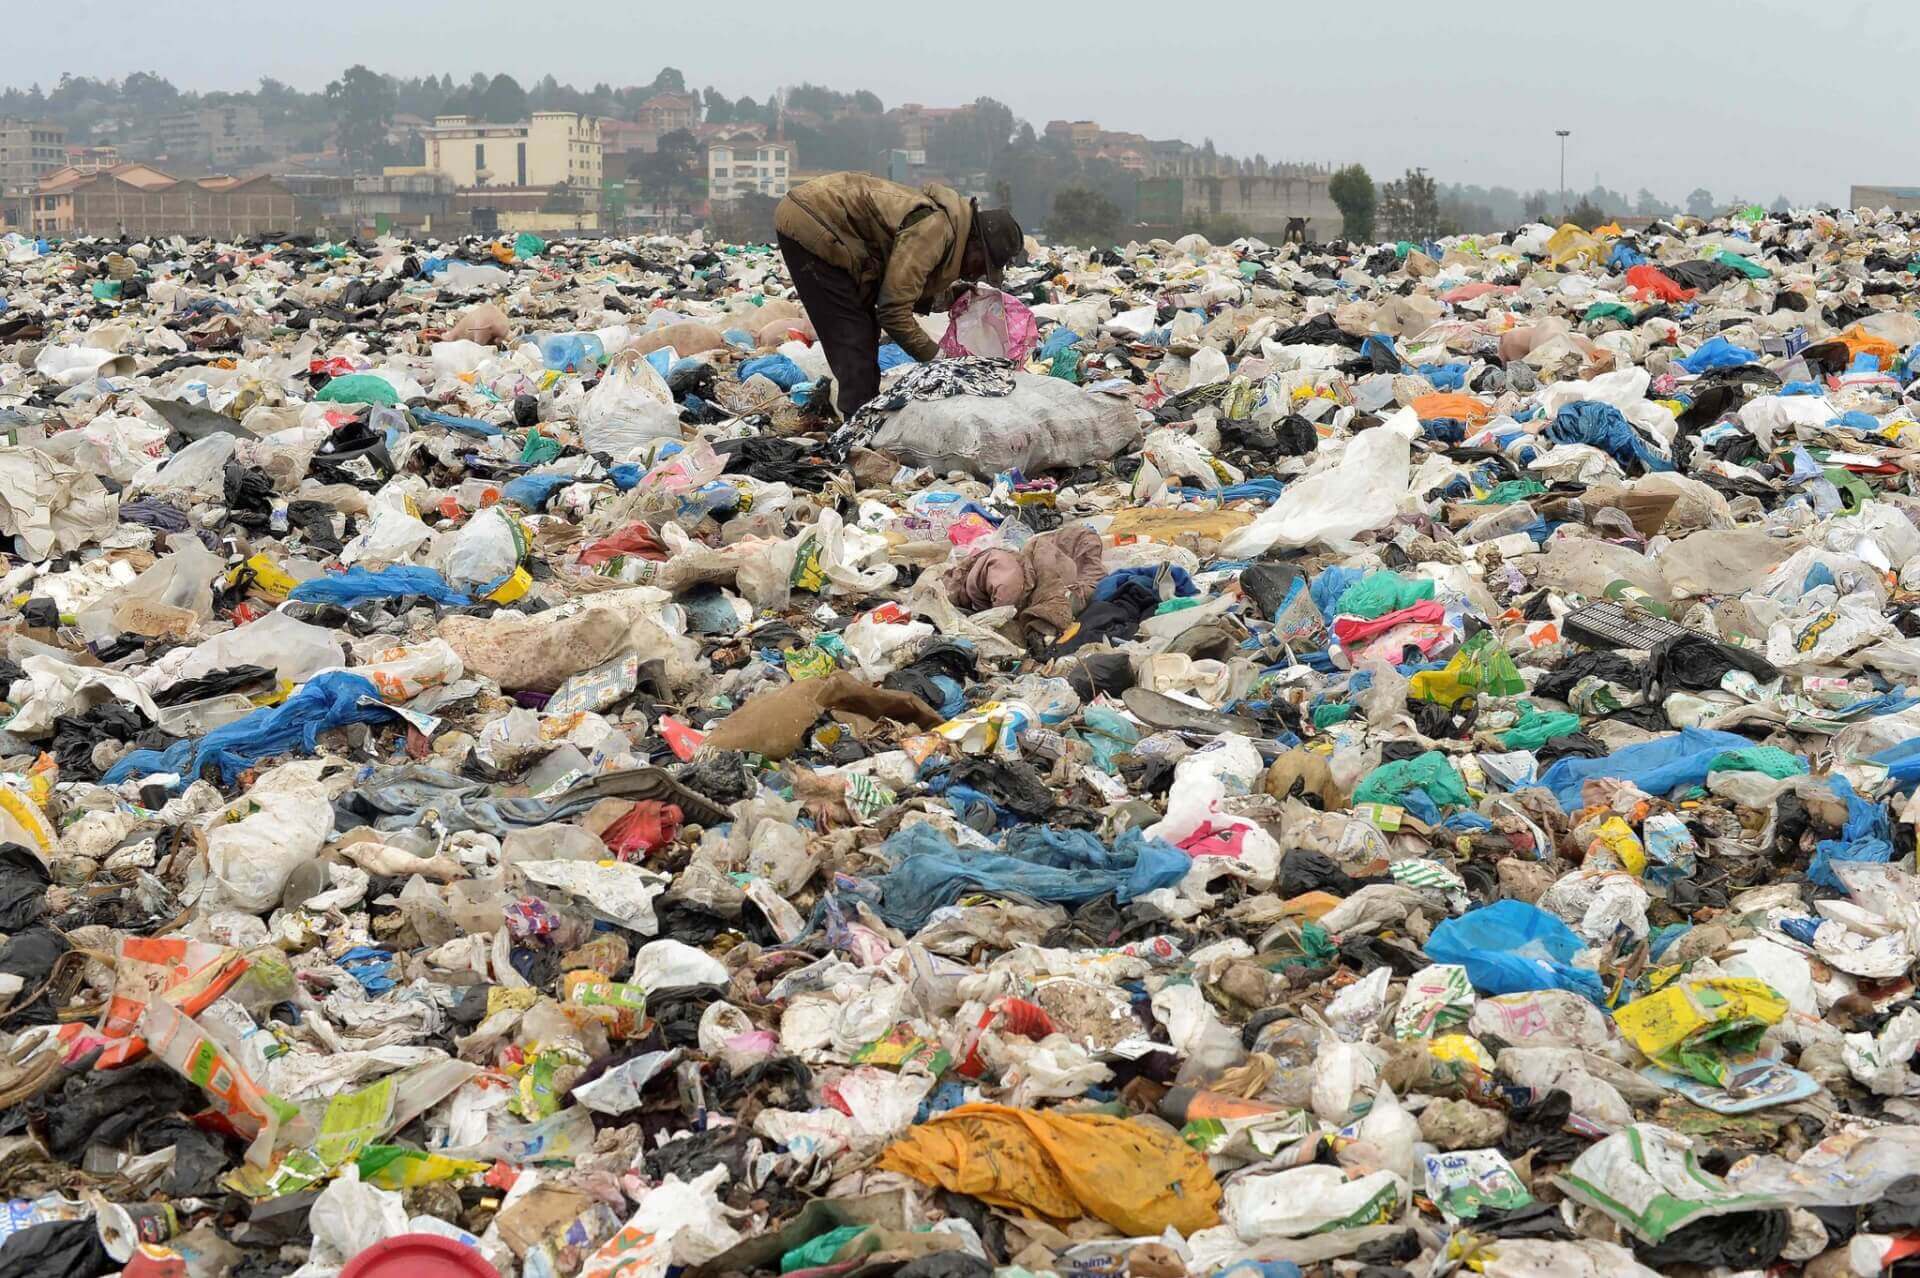 Oil Companies Lobby US Government to Pressure Kenya Into Relaxing Plastic Regulations